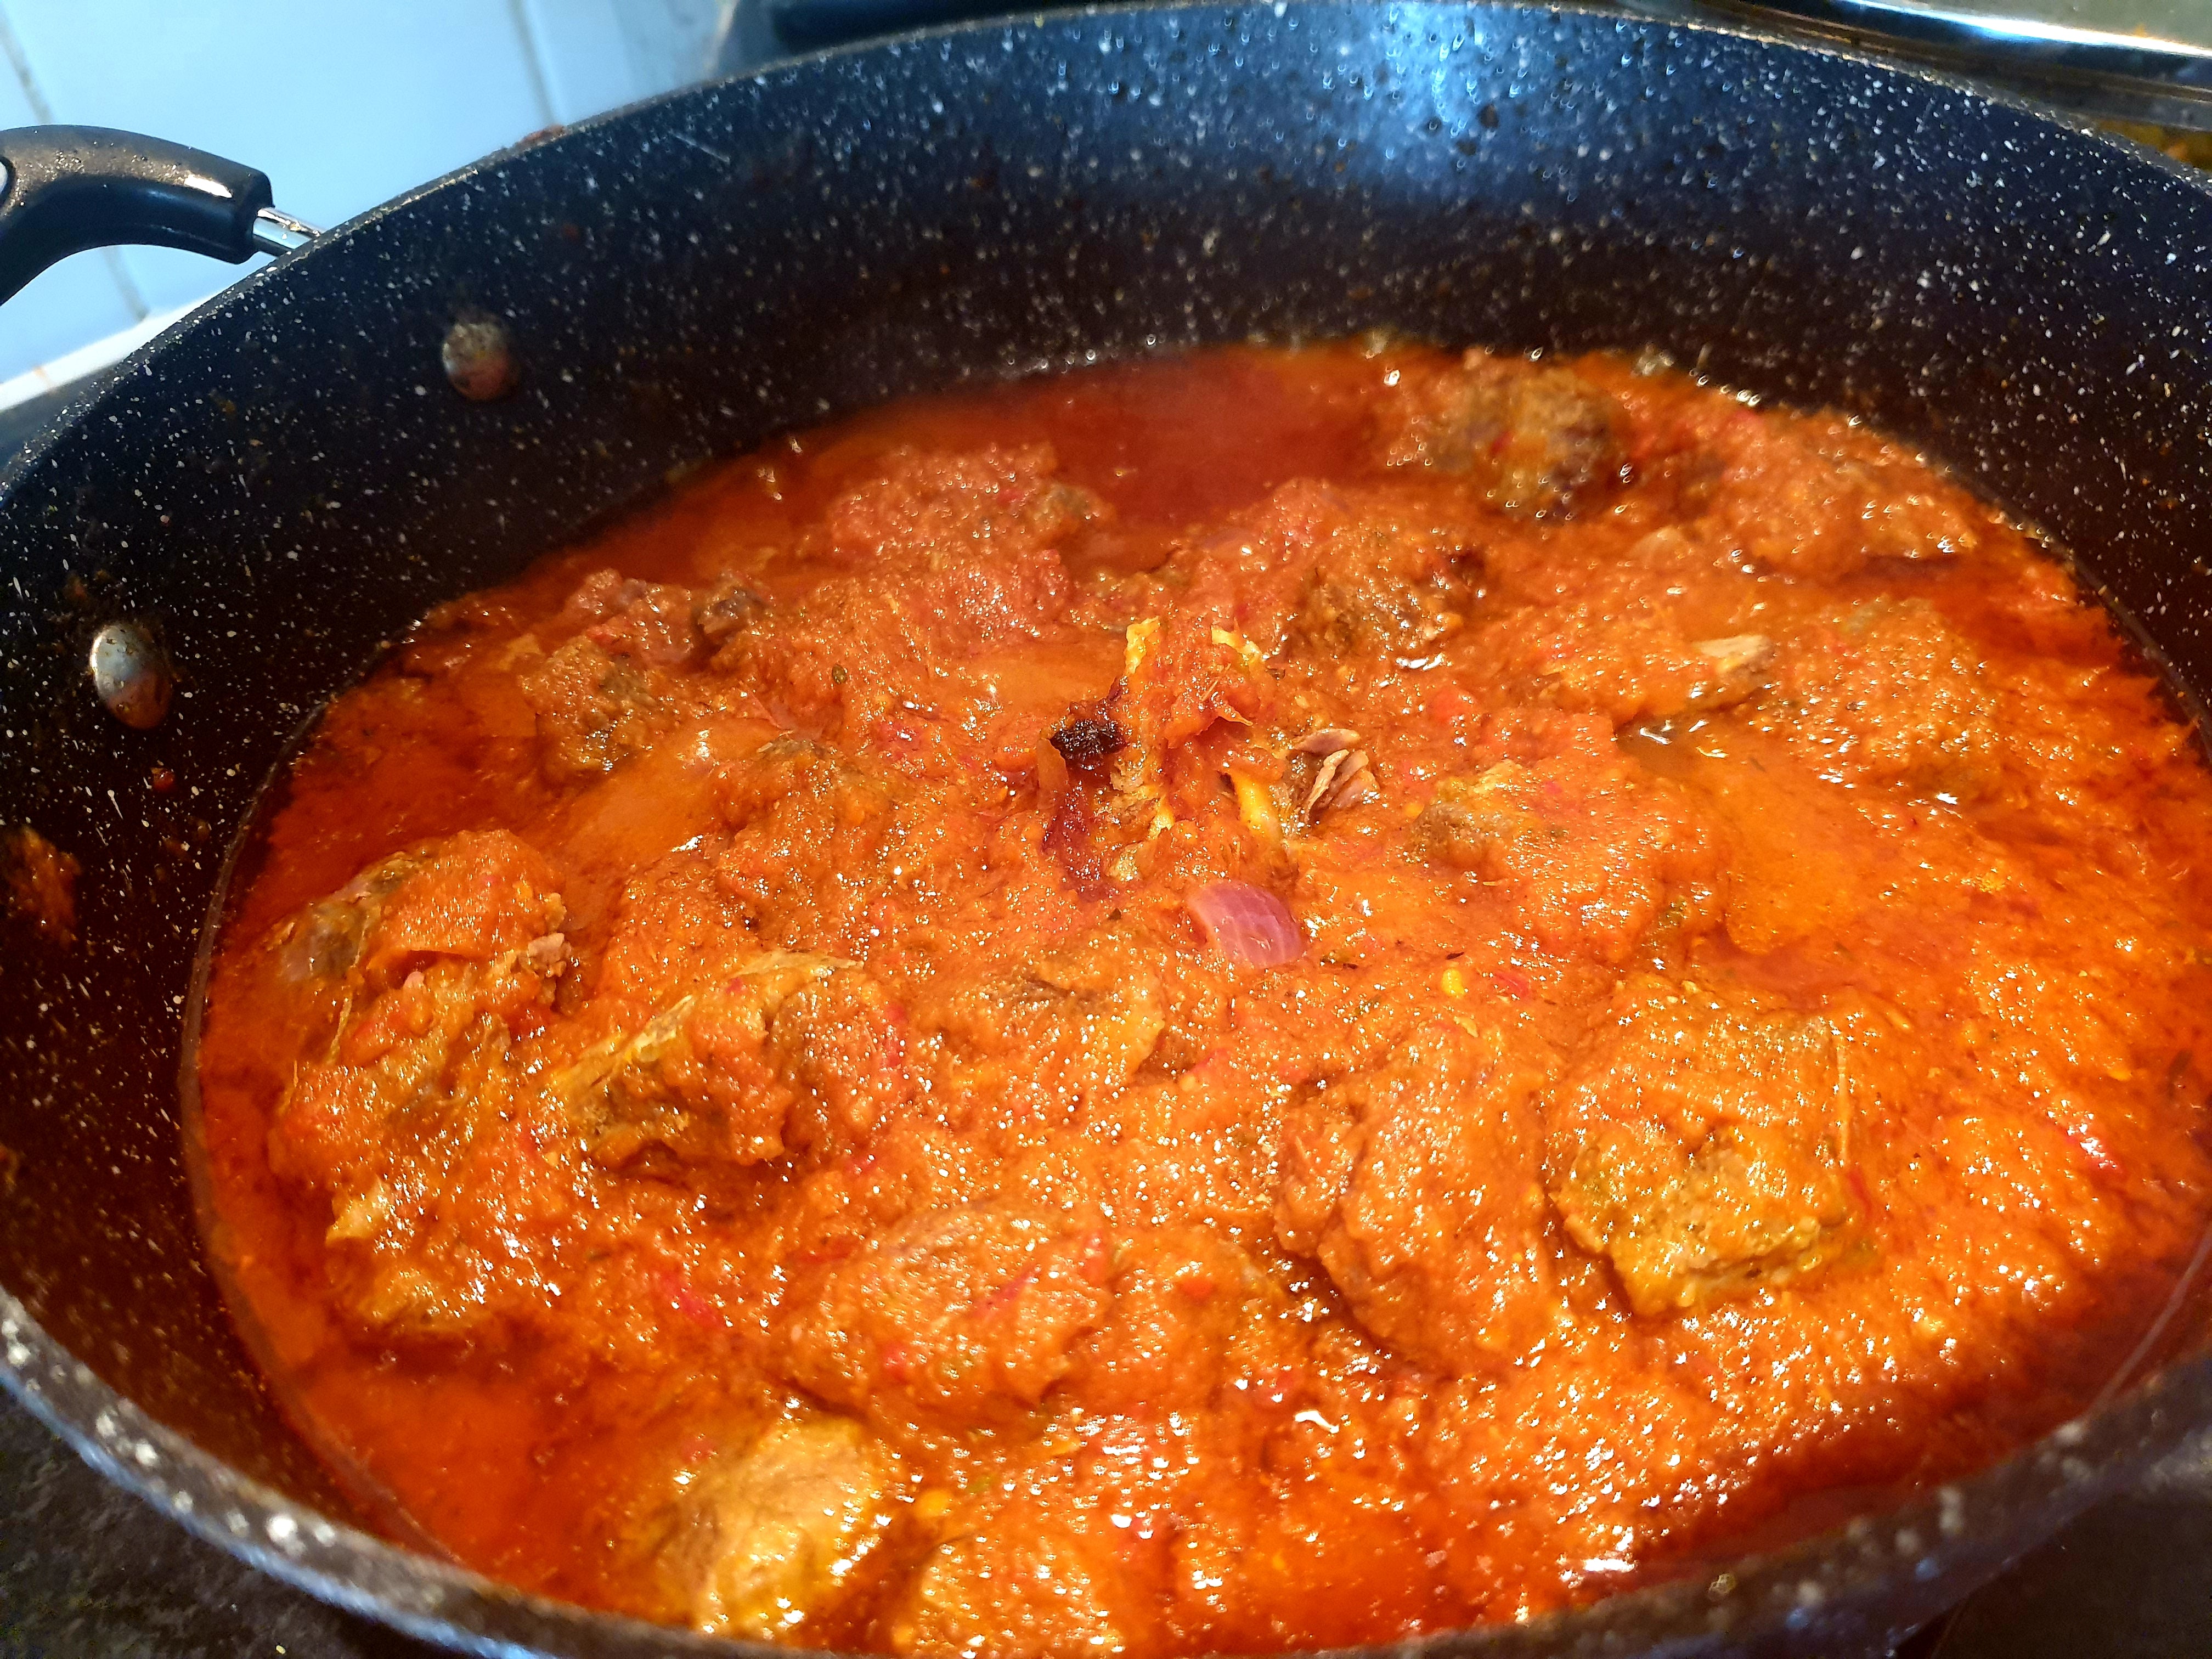 Nigerian Red Stew (30% Reduced Fat) - CookOnCall